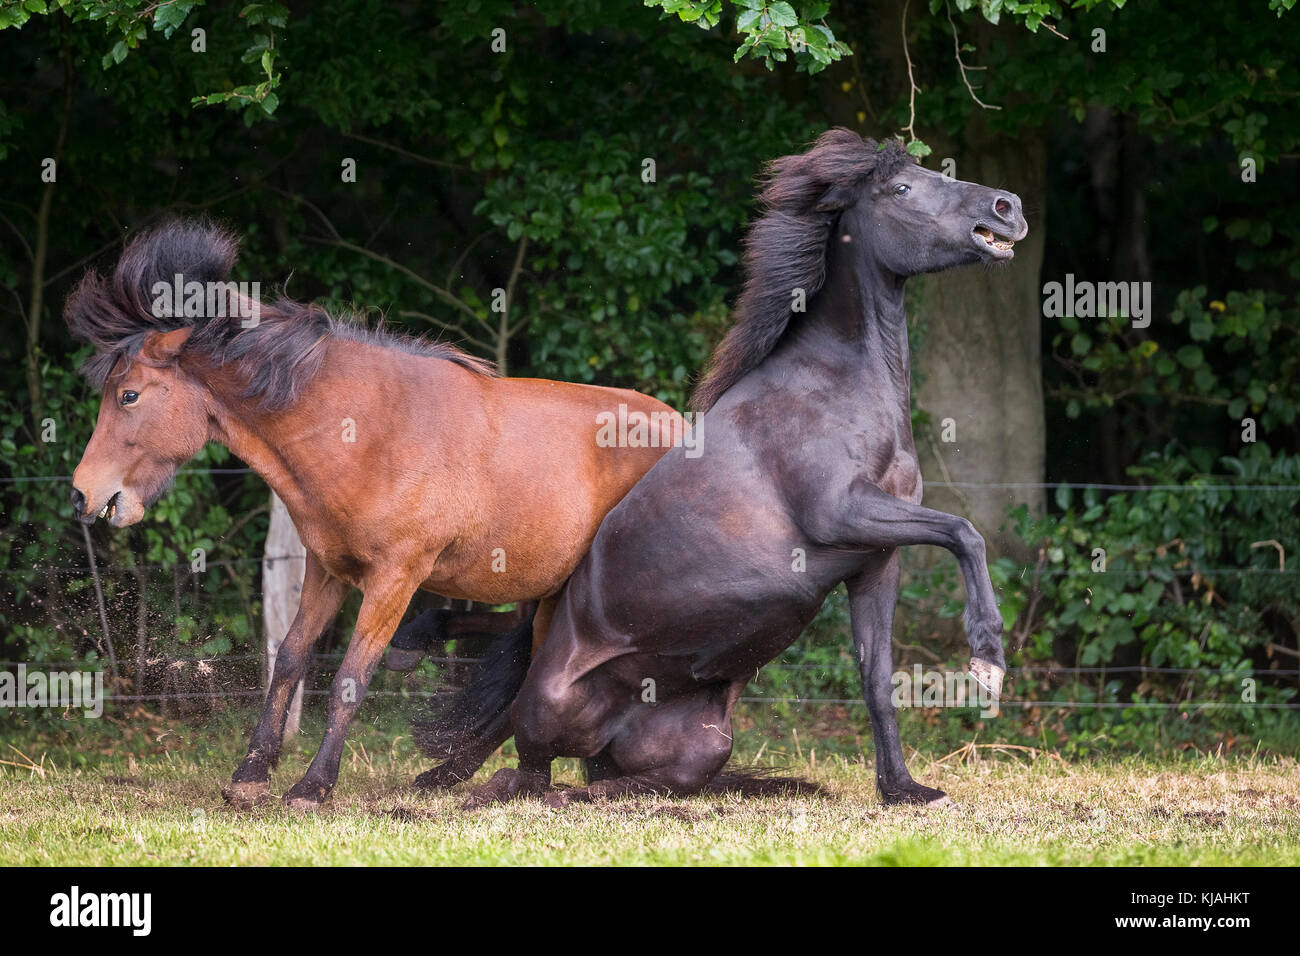 Icelandic Horse. Bay and black horse fighting on a pasture. Germany Stock Photo